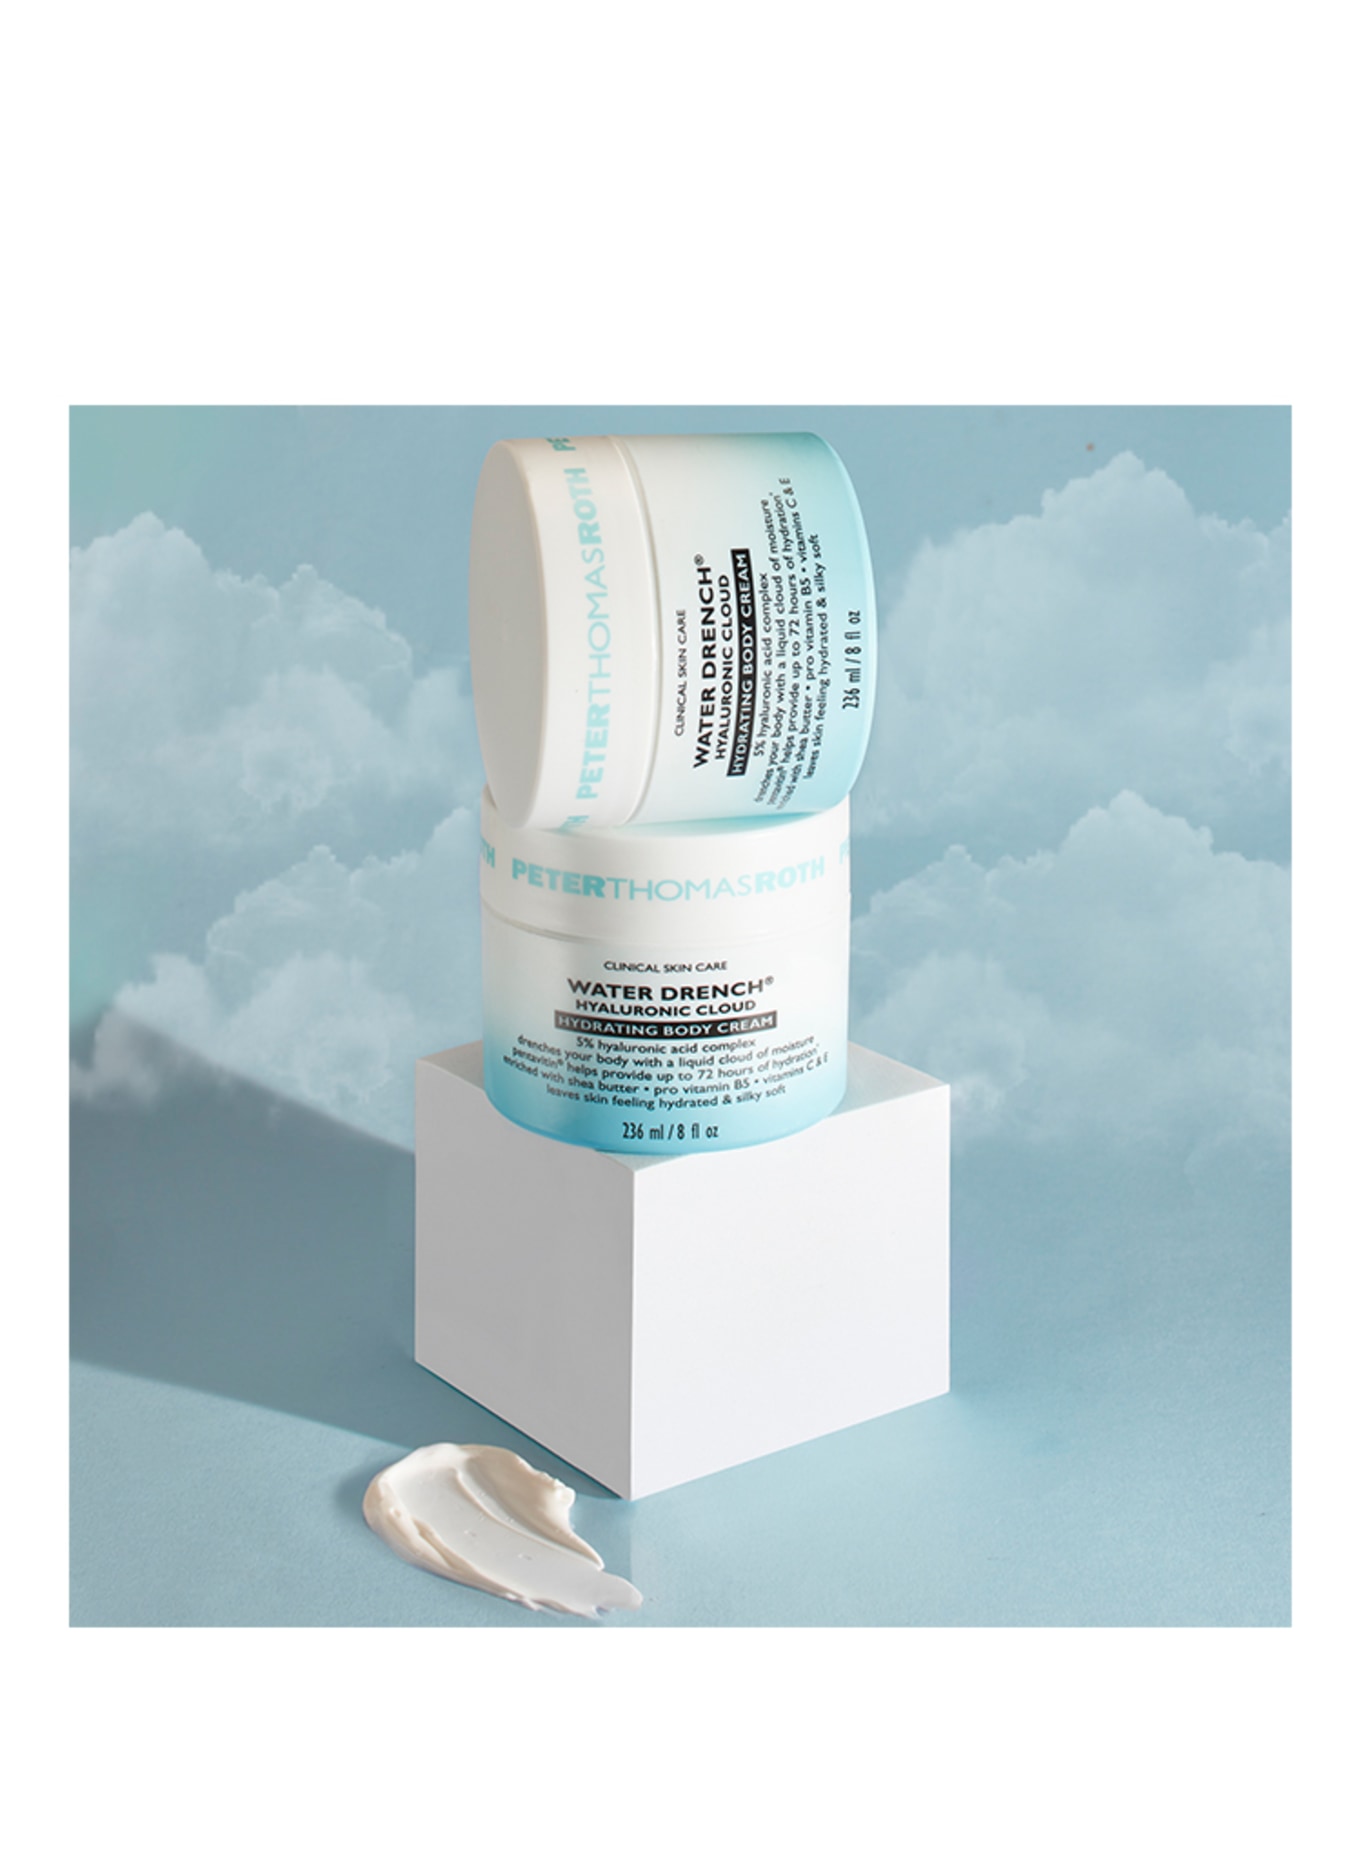 PETER THOMAS ROTH WATER DRENCH® HYALURONIC CLOUD (Bild 6)